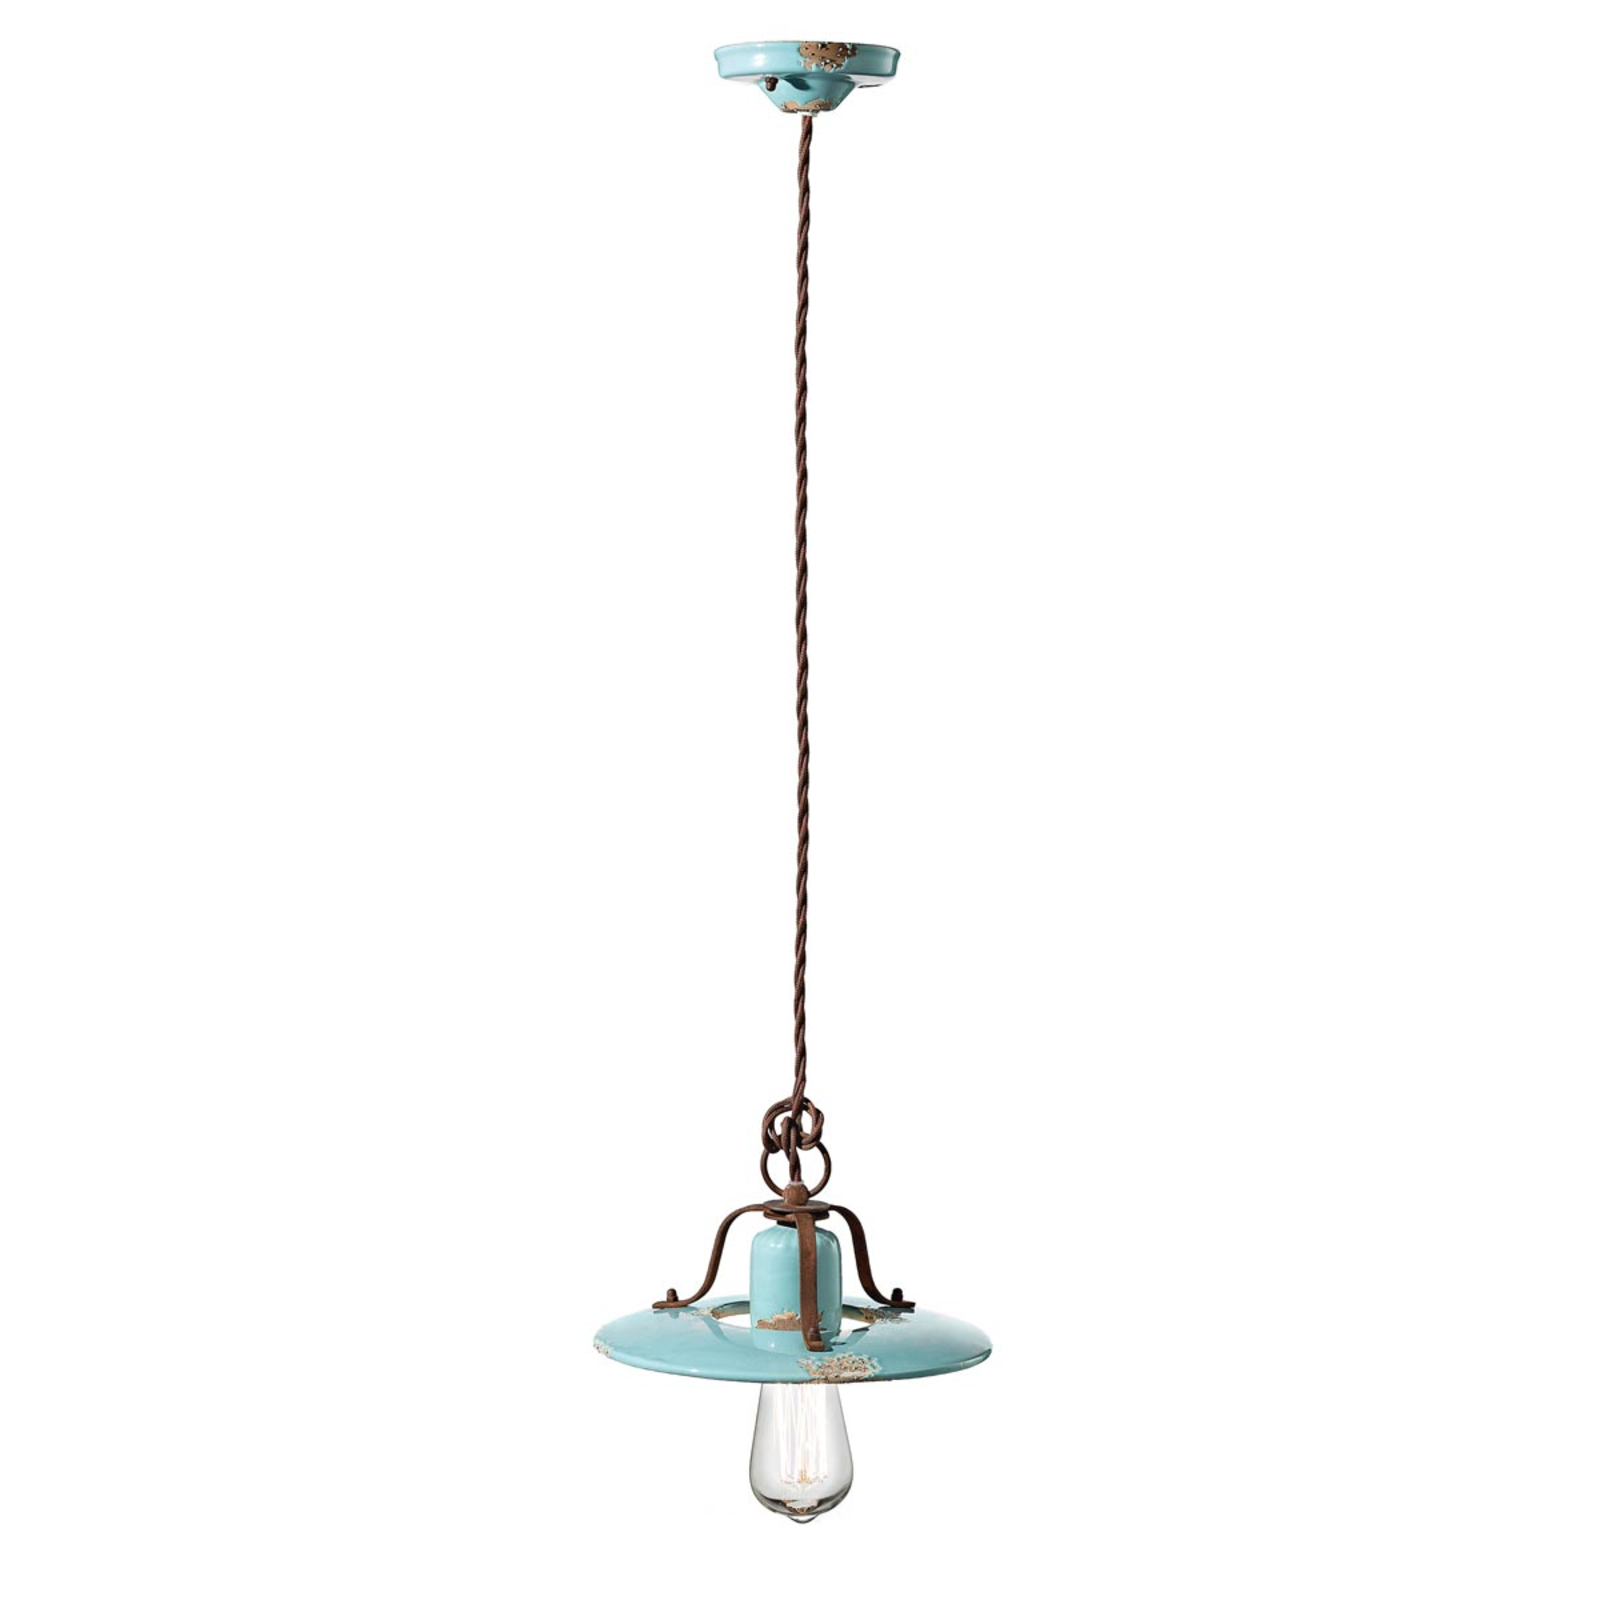 Vintage Giorgia hanging light in turquoise